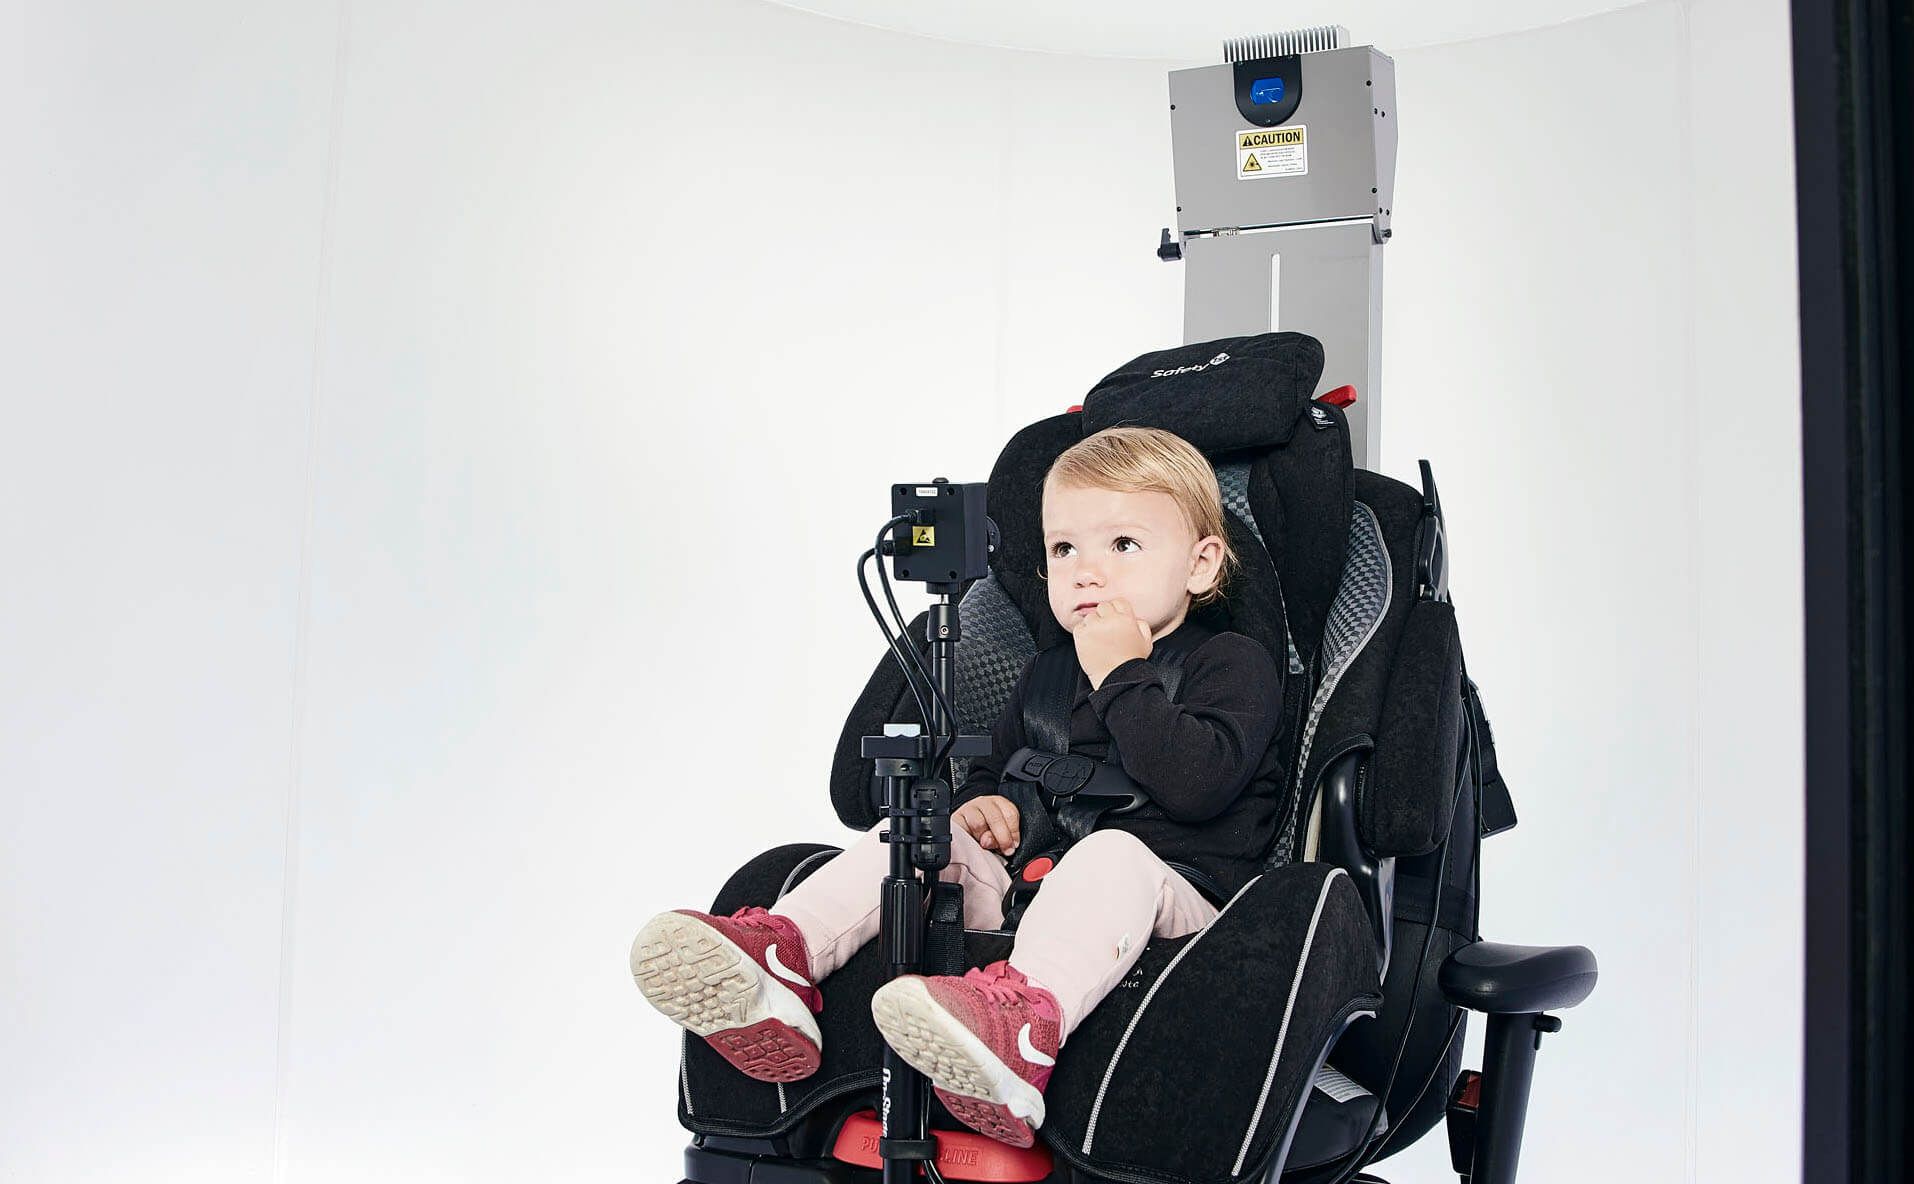 Young girl sat in car seat add-on to Orion rotary chair